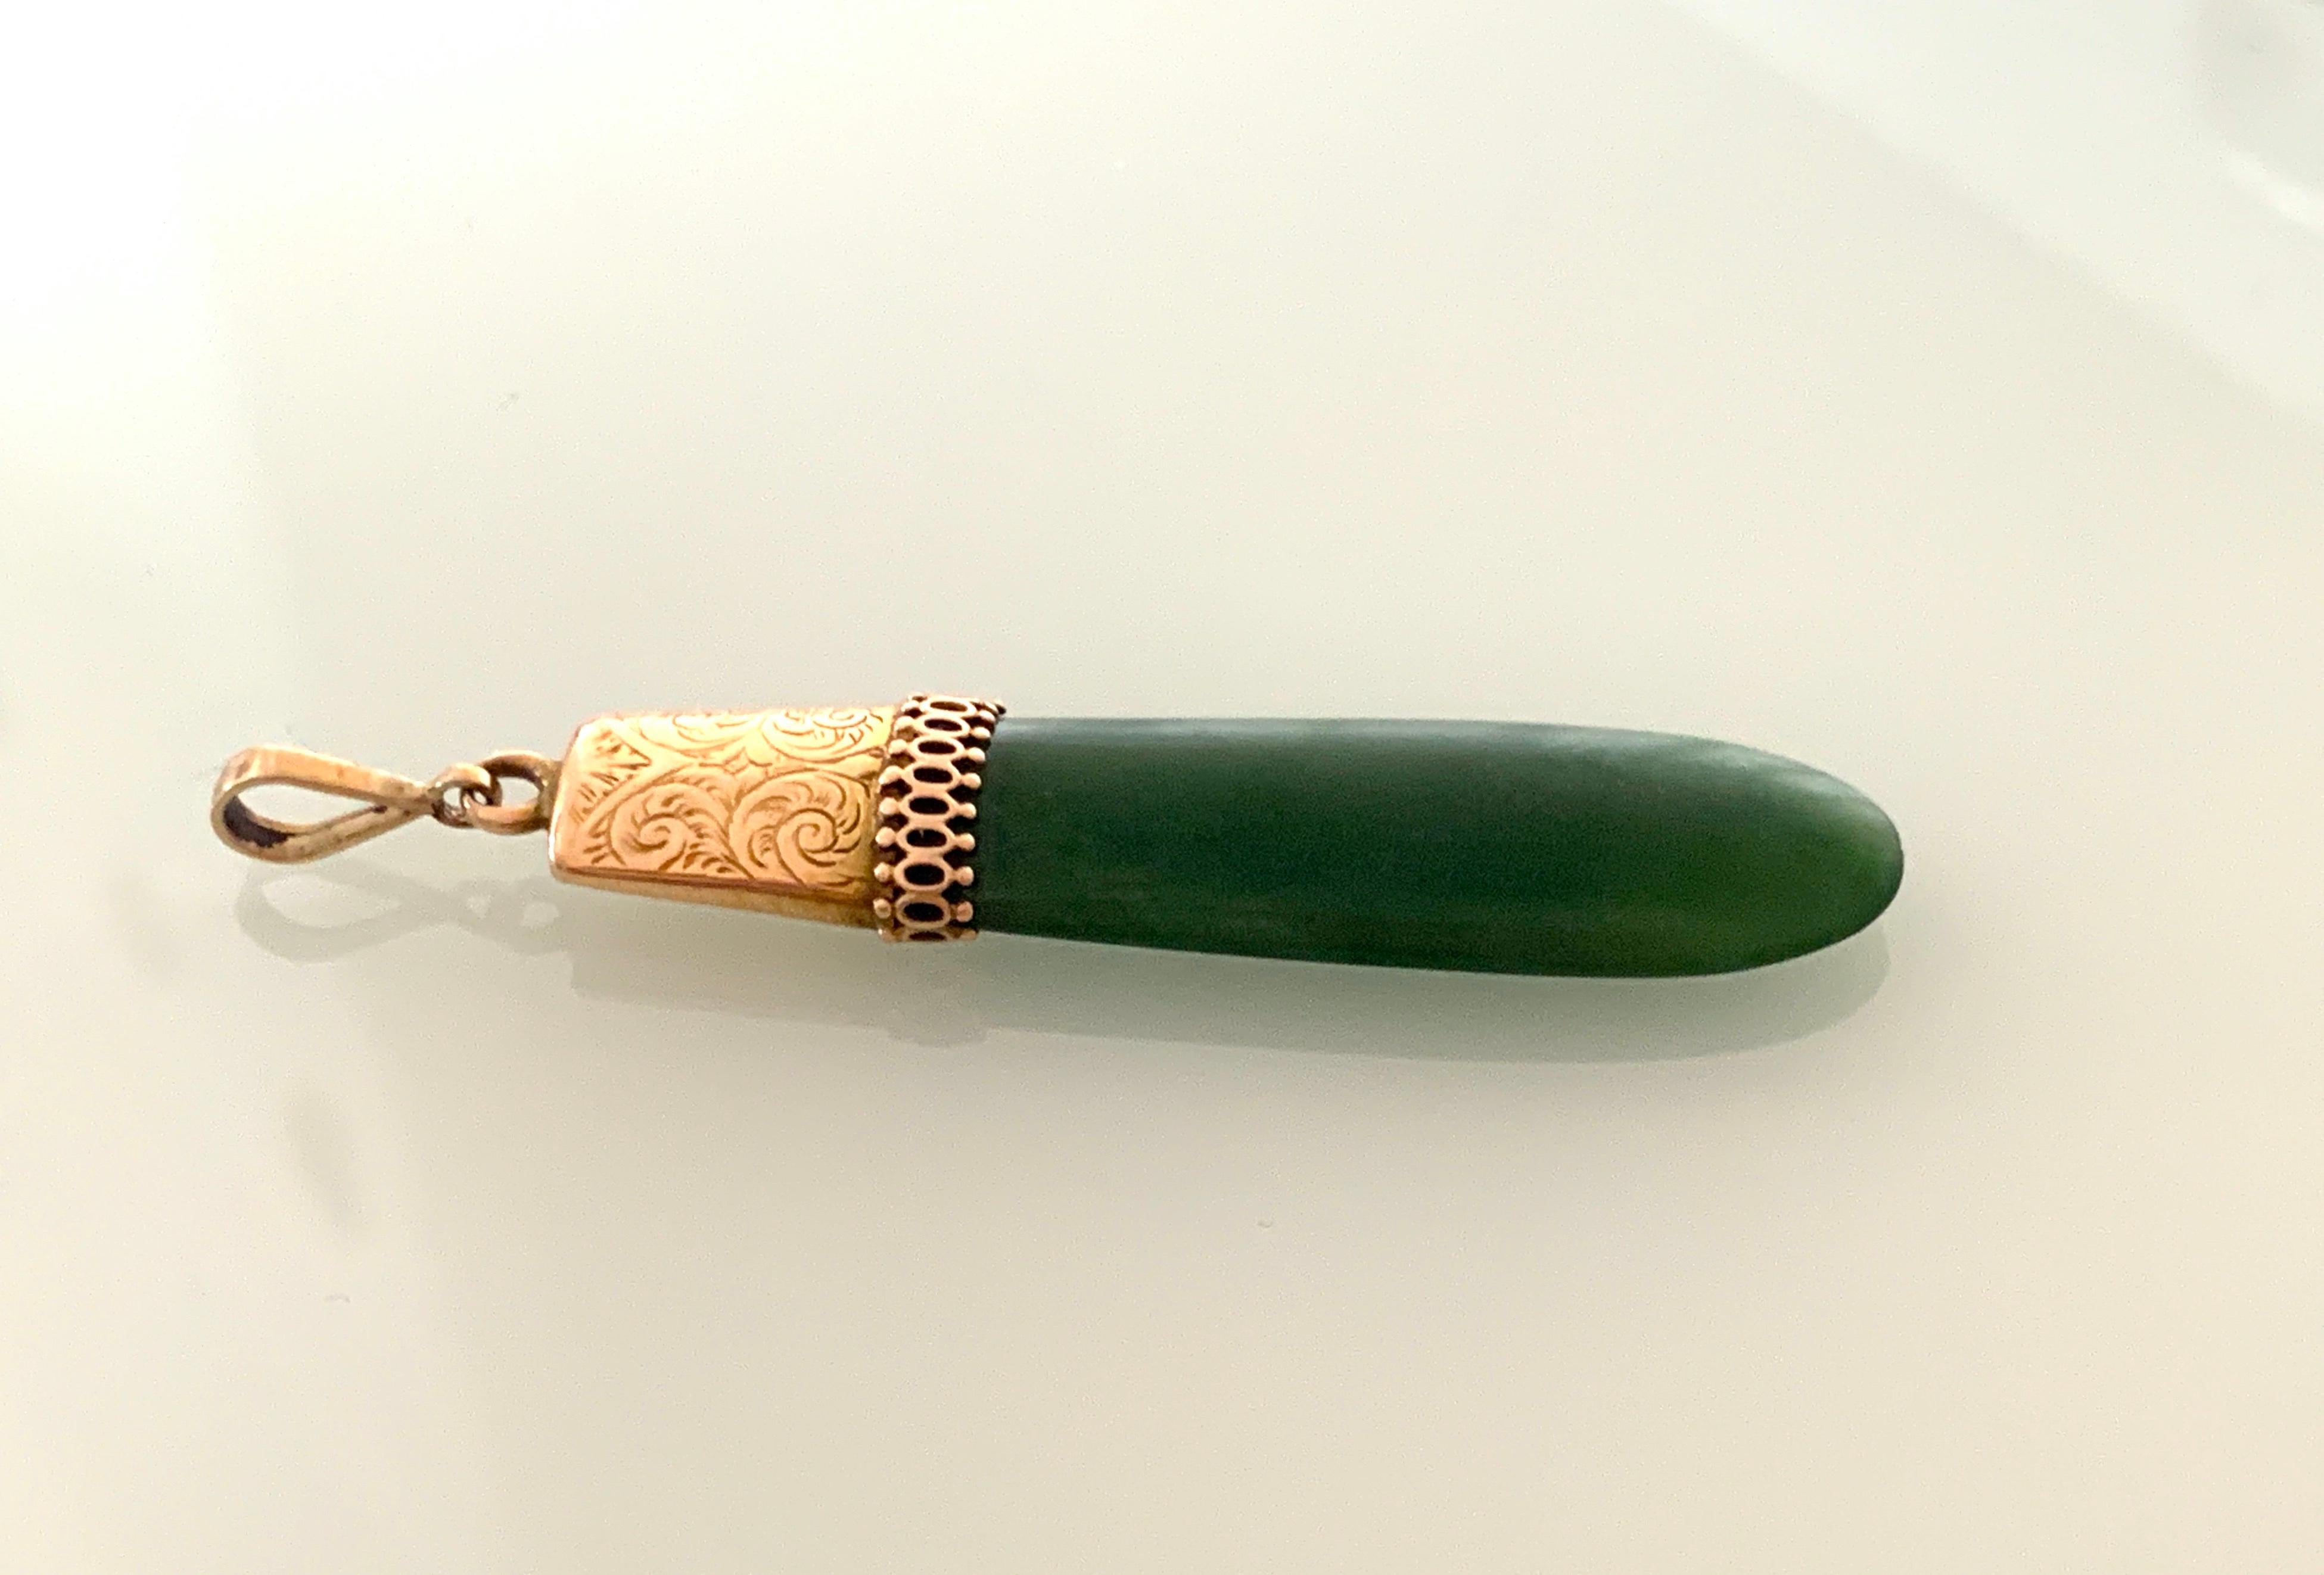 Antique 9ct Gold Jade Pendant 
With Beautiful 9ct Gold engraved mount with decorative edge.
Victorian Era Circa 1800s.